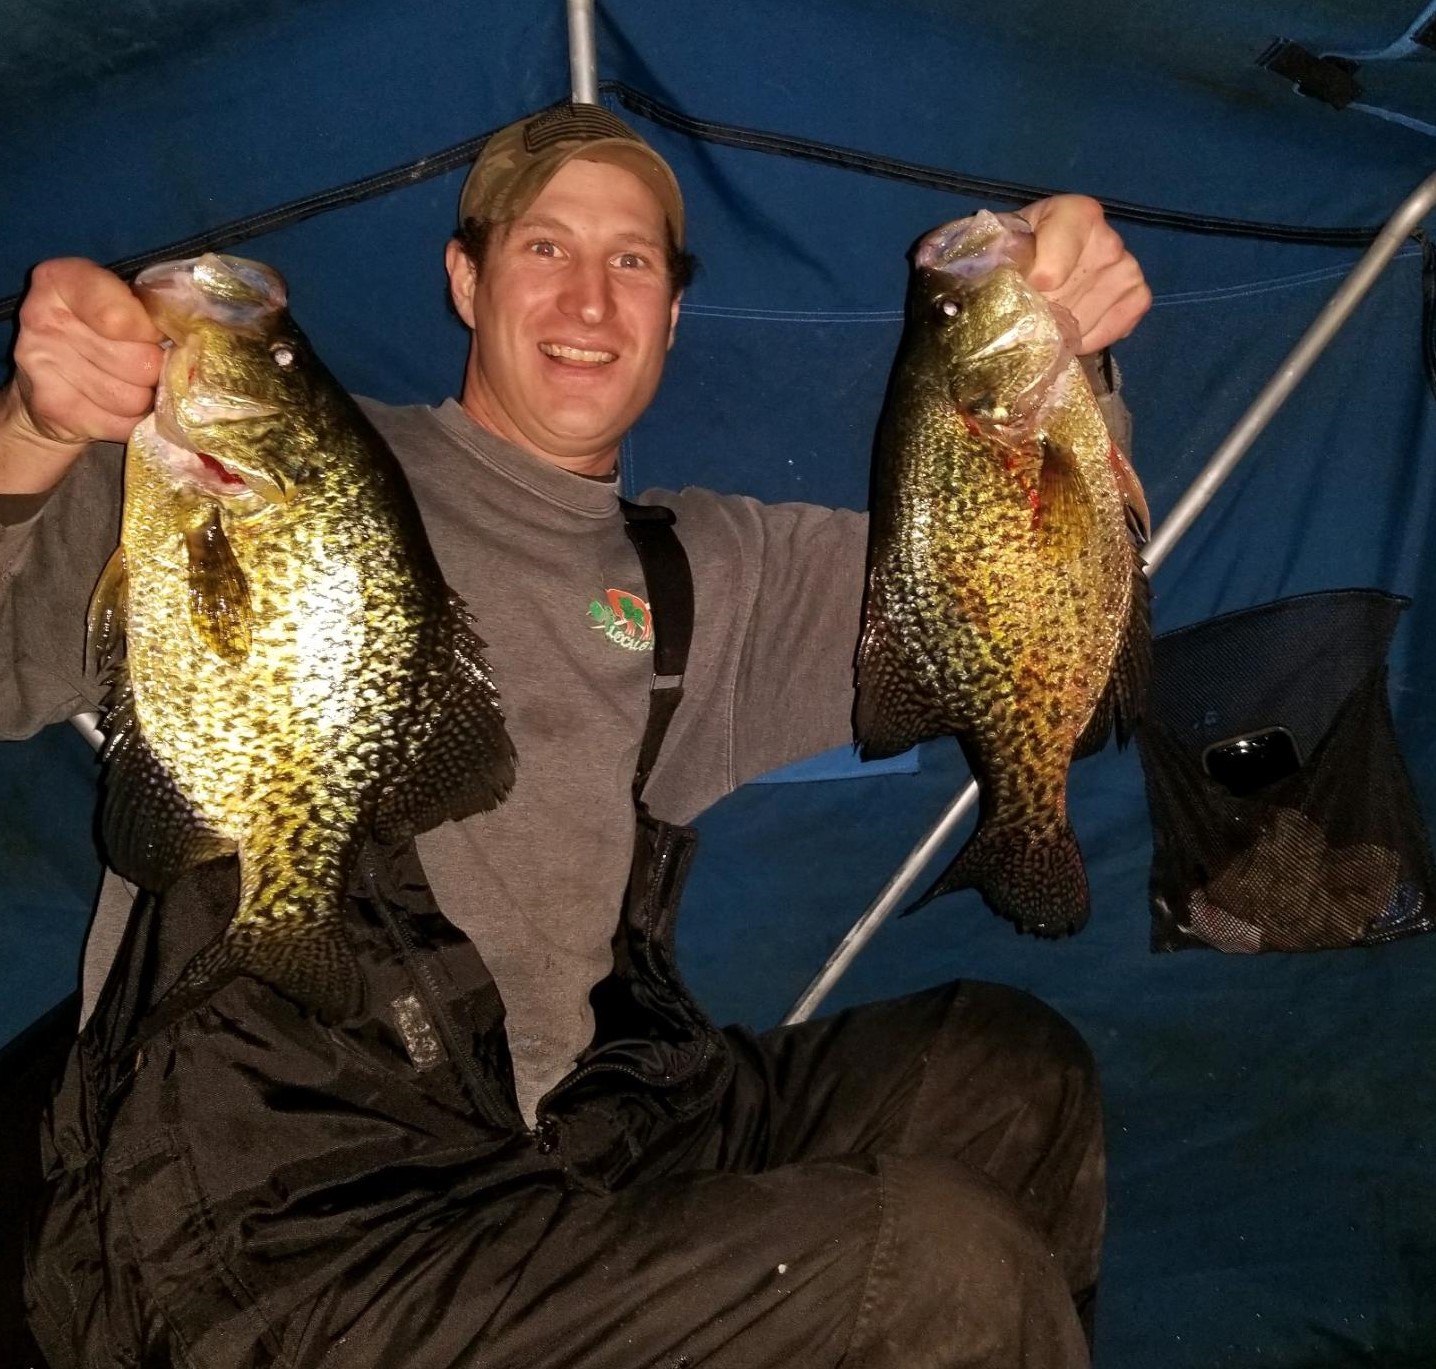 Ice fishing 101 in Upstate NY: The basics for having a safe, good